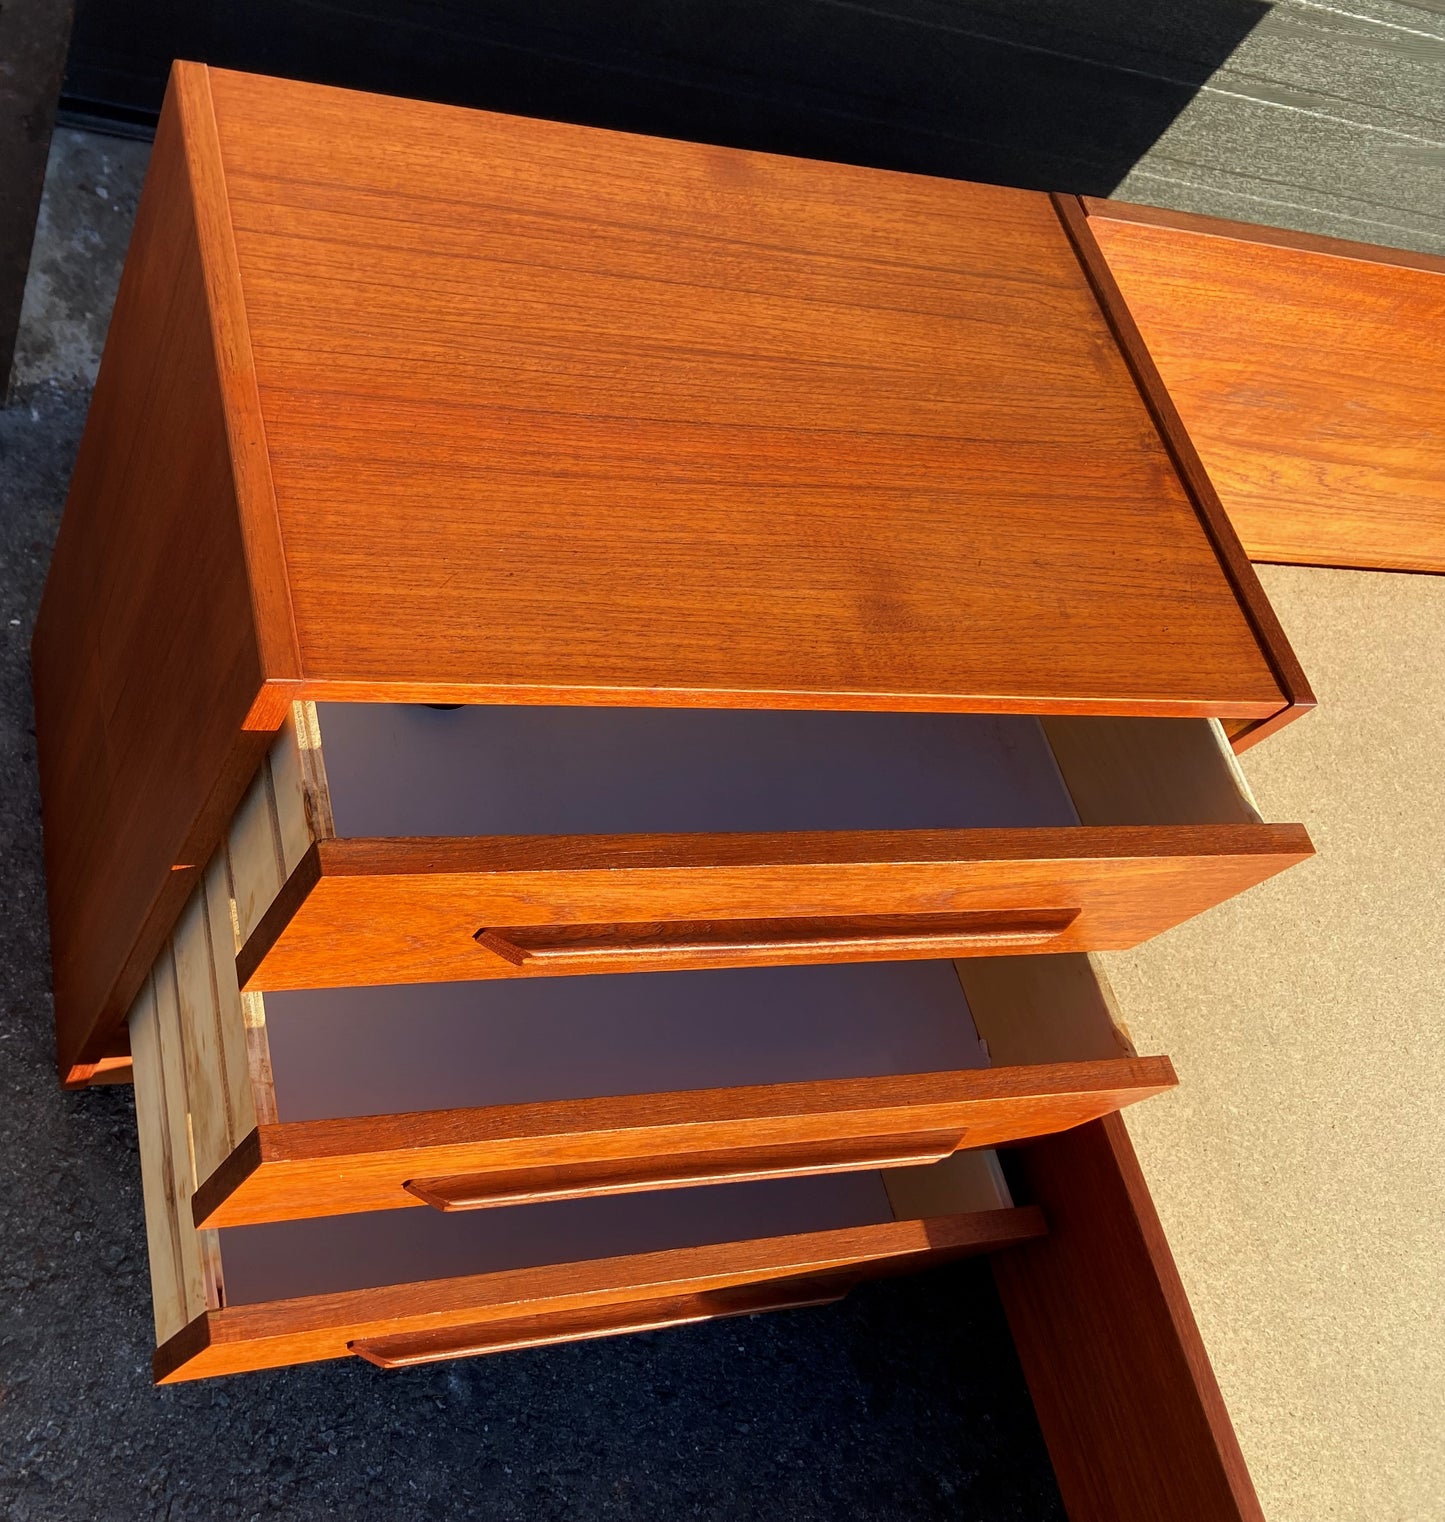 REFINISHED MCM Teak Bed Single XL w 2 Drawers & Nightstand. Matching Desk available